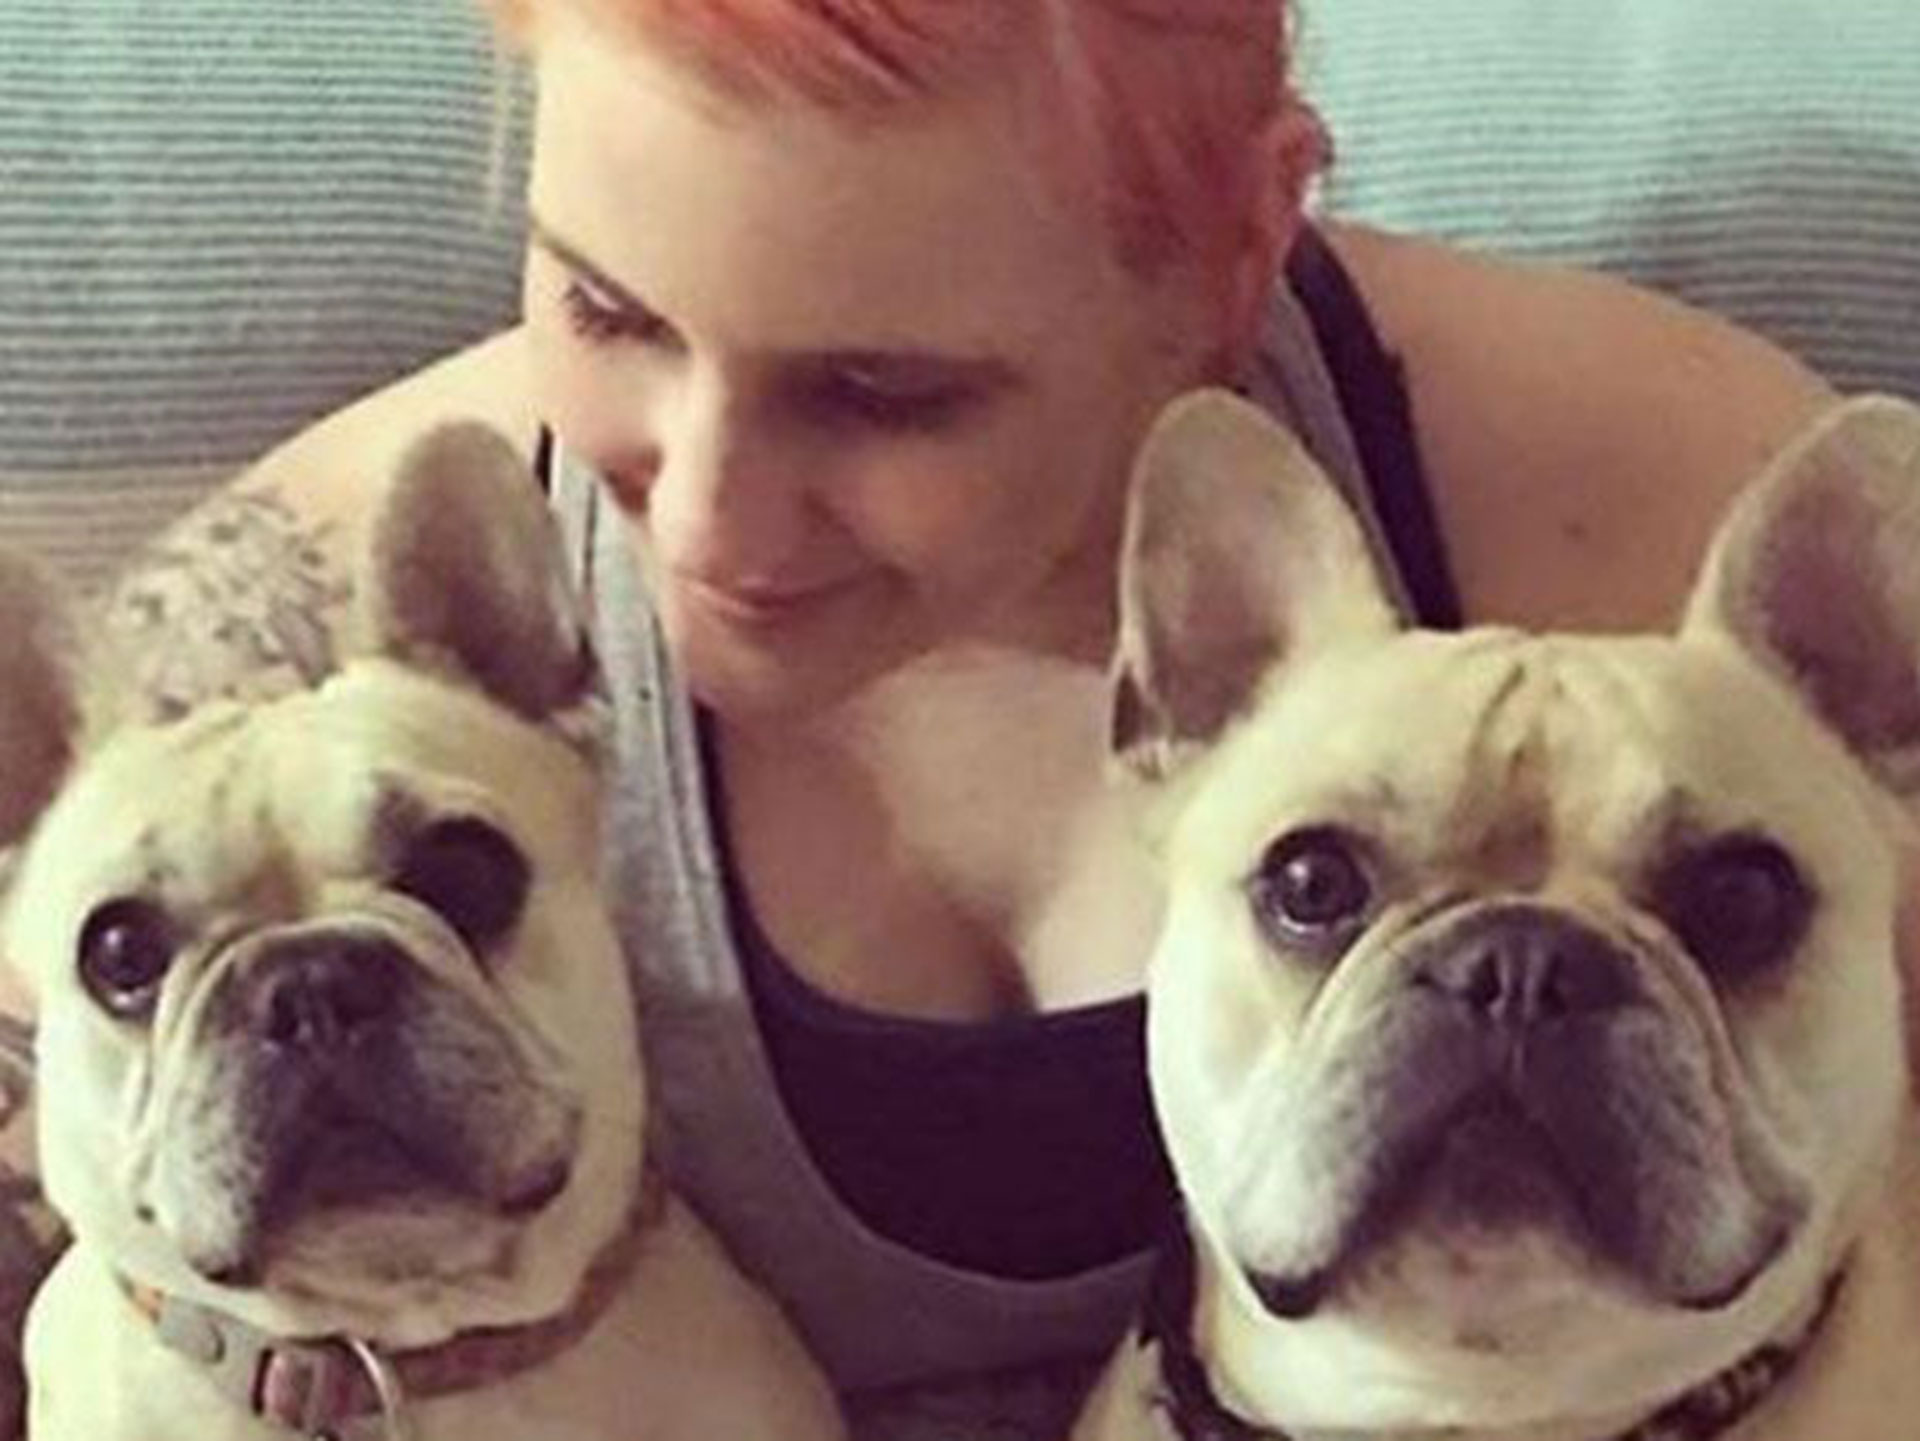 Heartbroken couple left French bulldogs with a sitter and both died from heatstroke